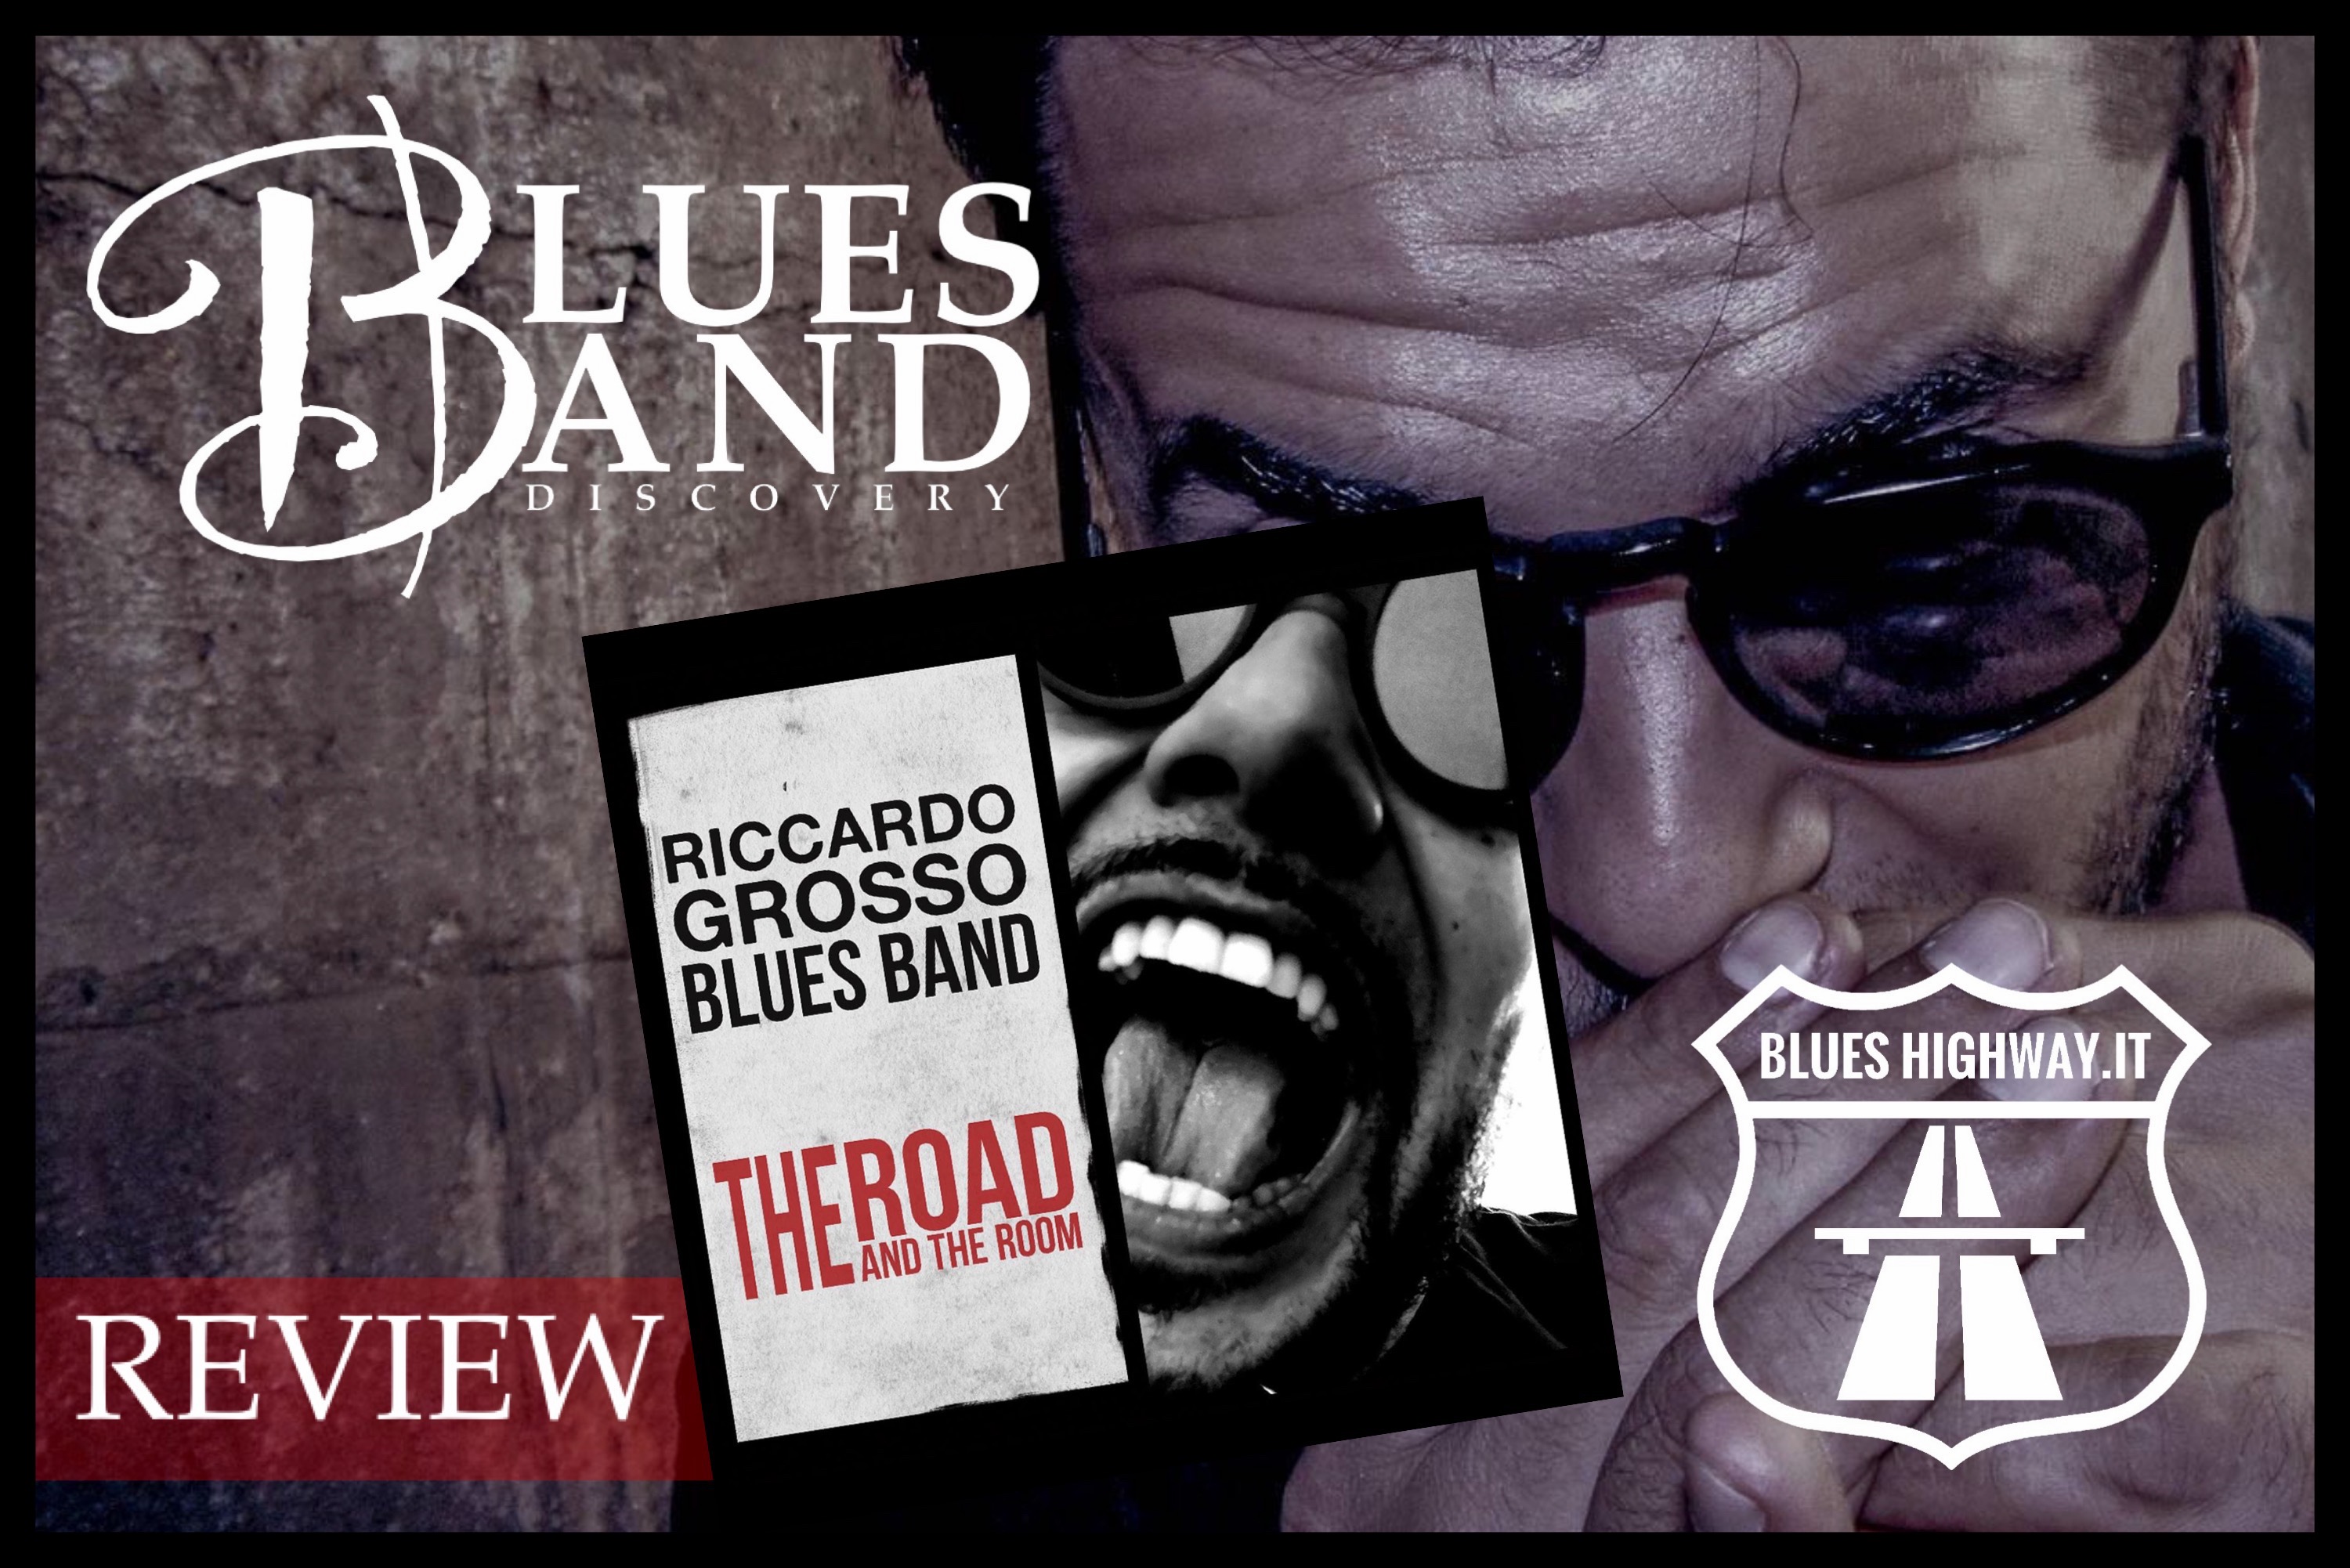 THE ROAD AND THE ROOM – RICCARDO GROSSO BLUES BAND